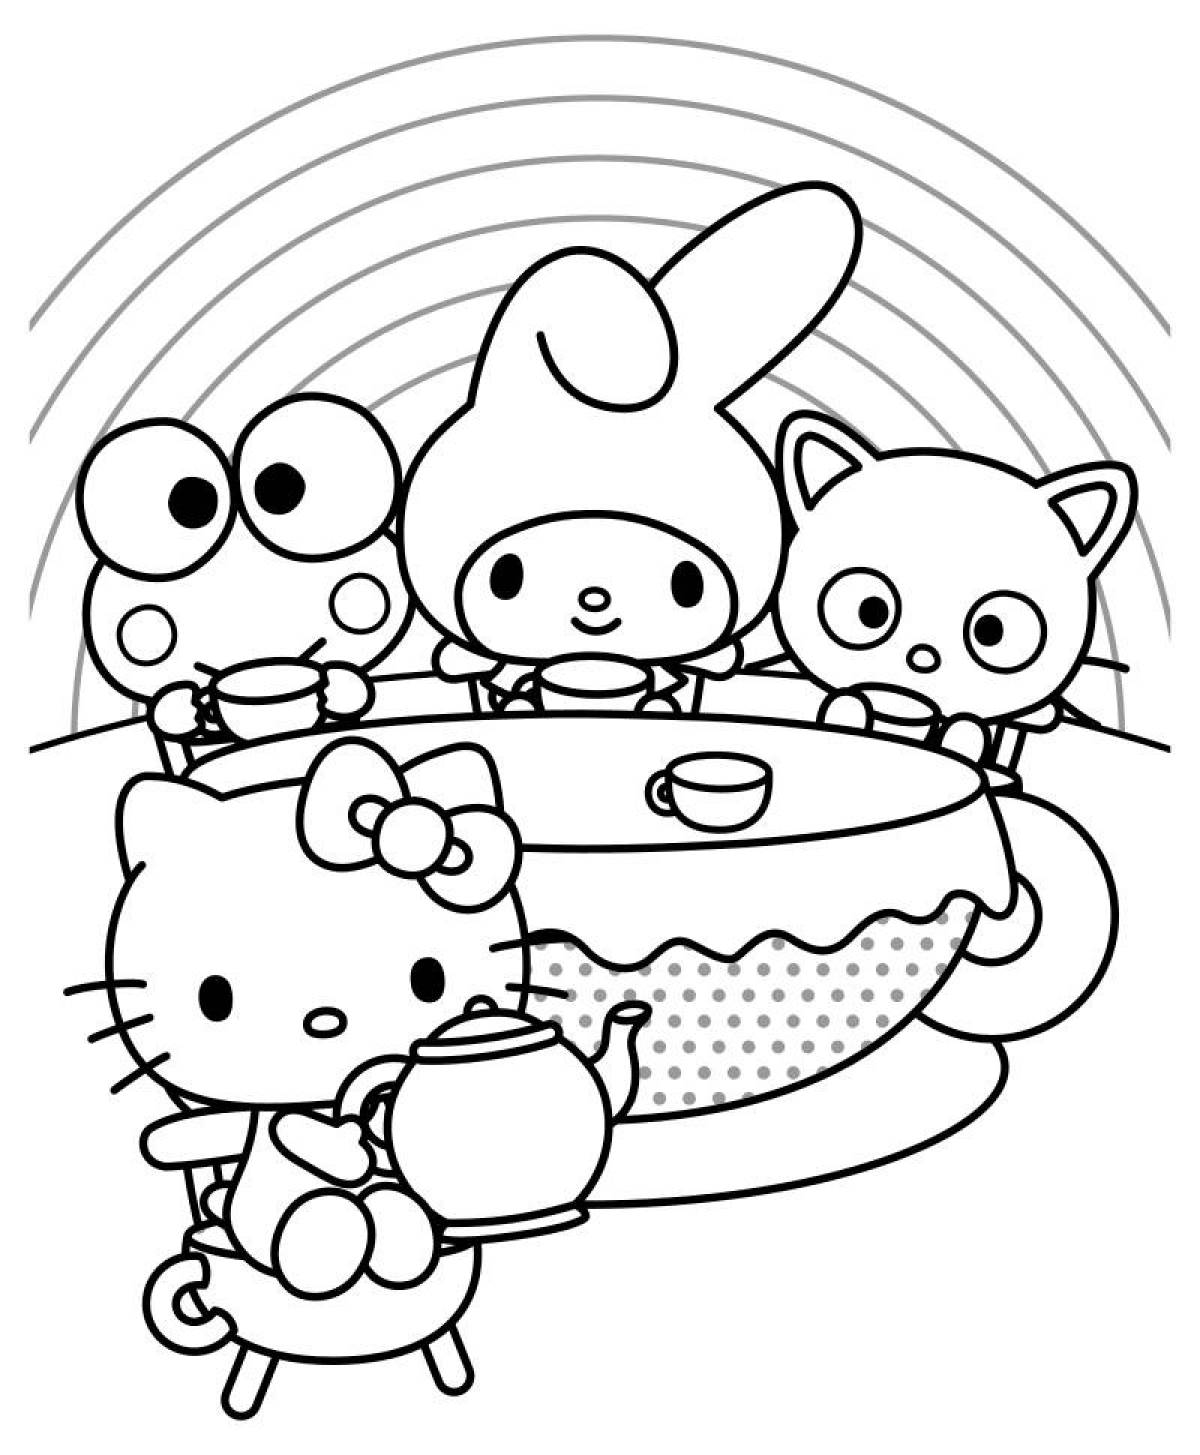 Funny kuromi and mai melody coloring page